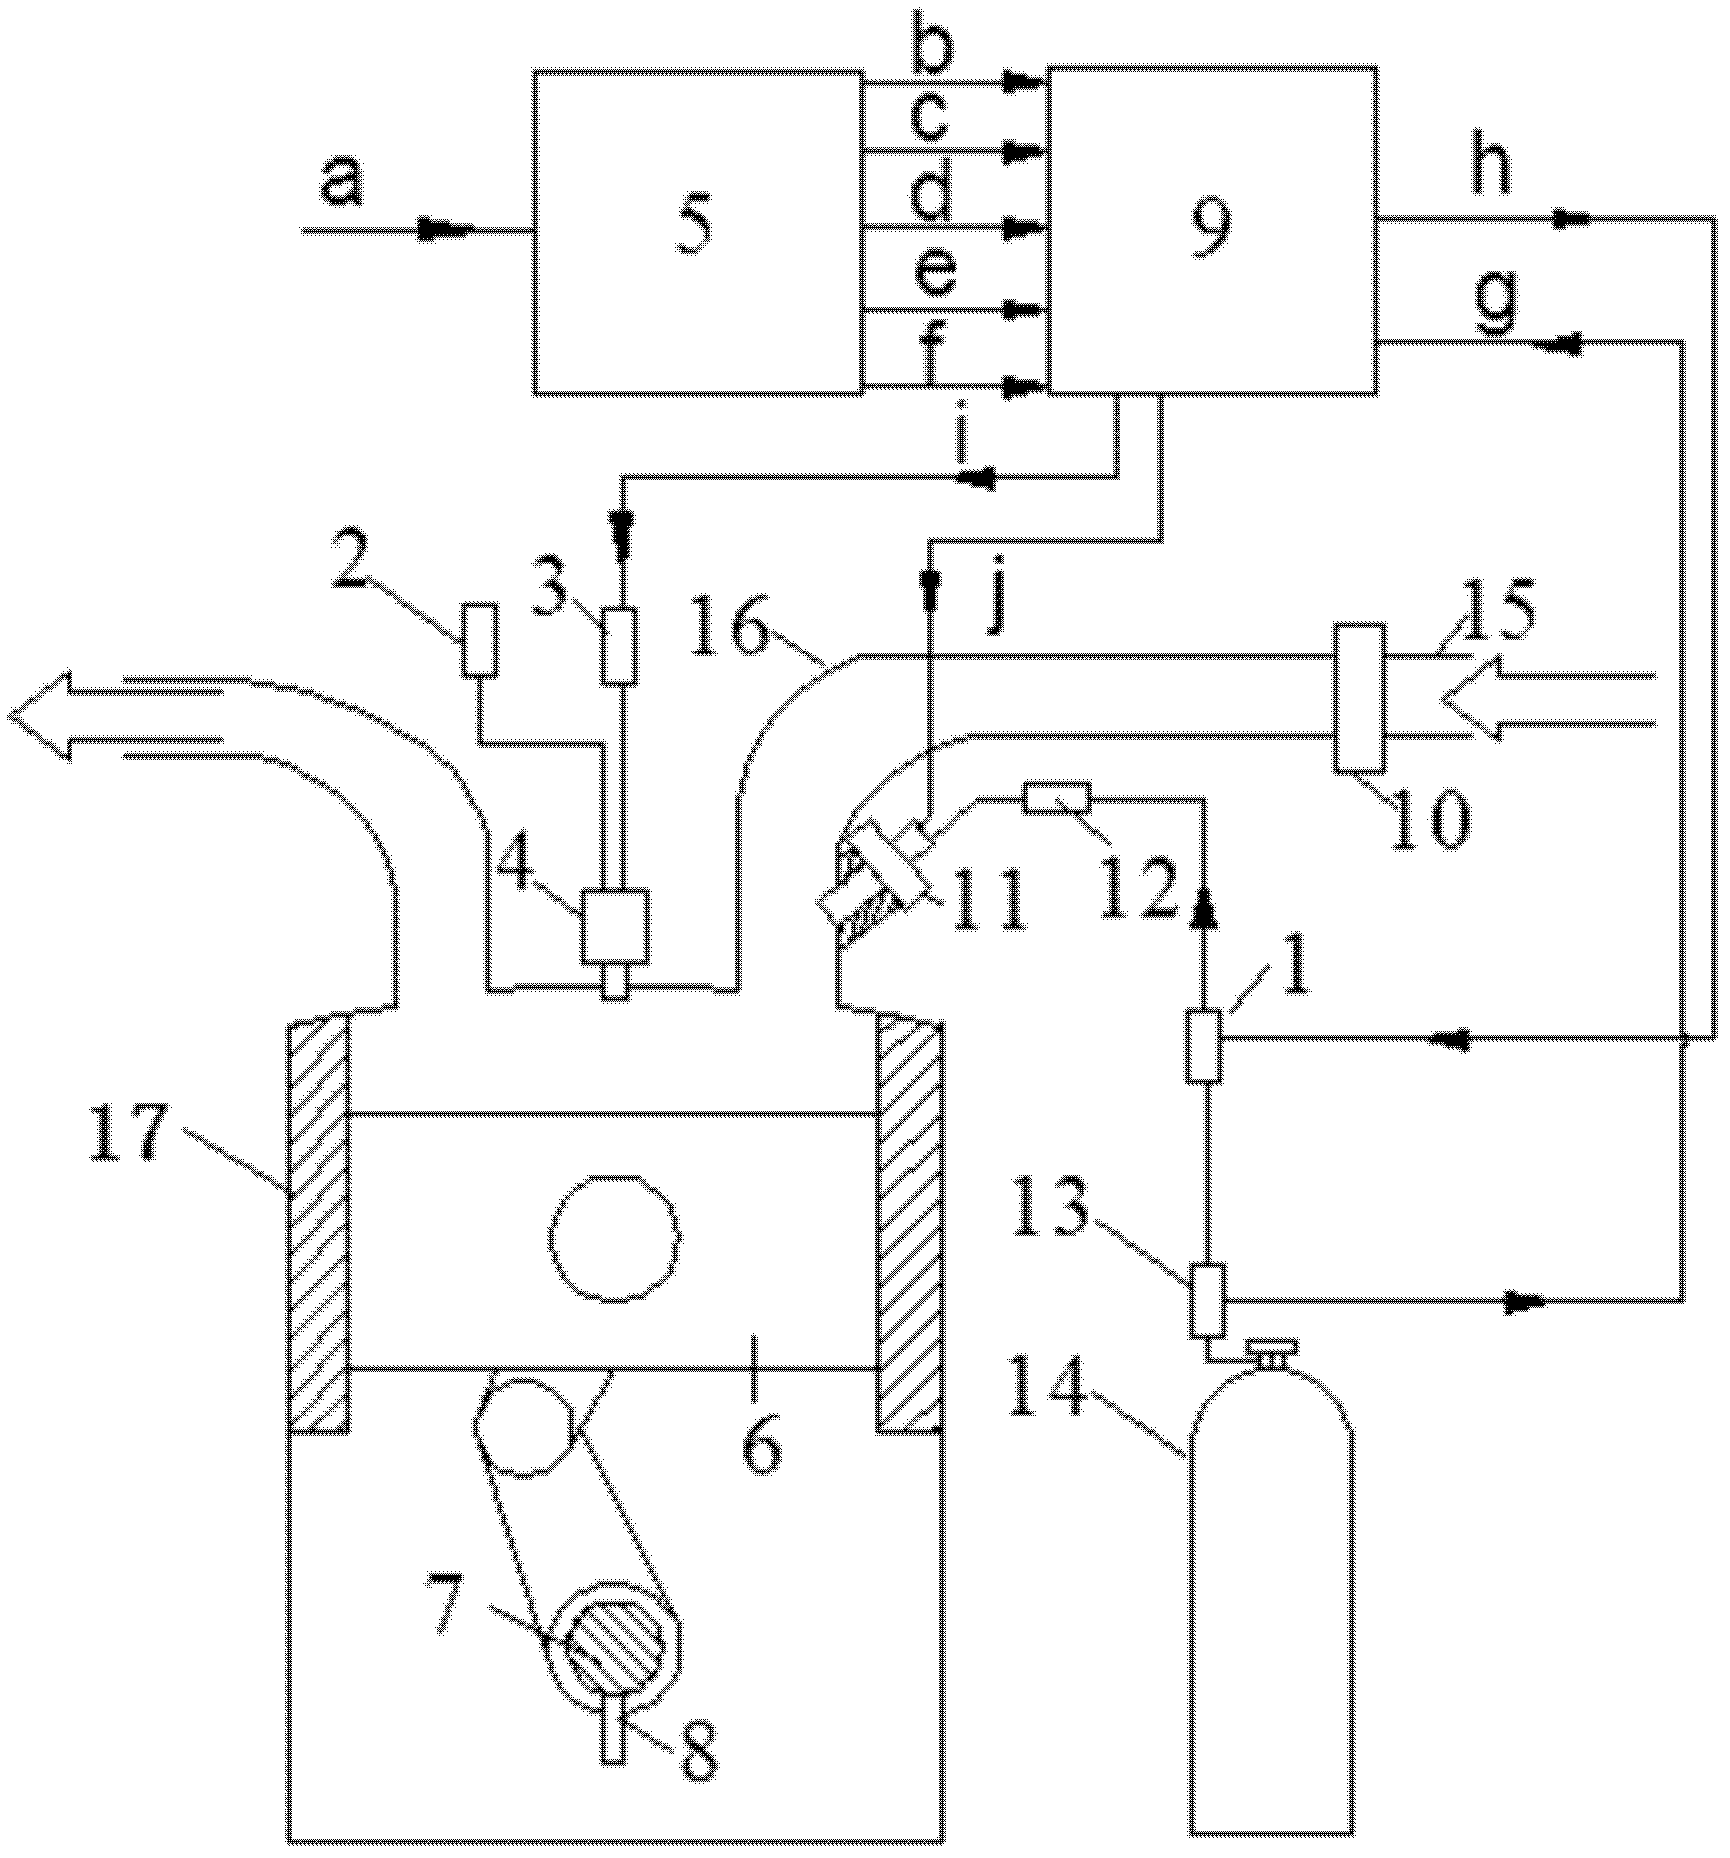 Diesel engine system capable of being powered by mixed DME (dimethyl ether) gas and control method